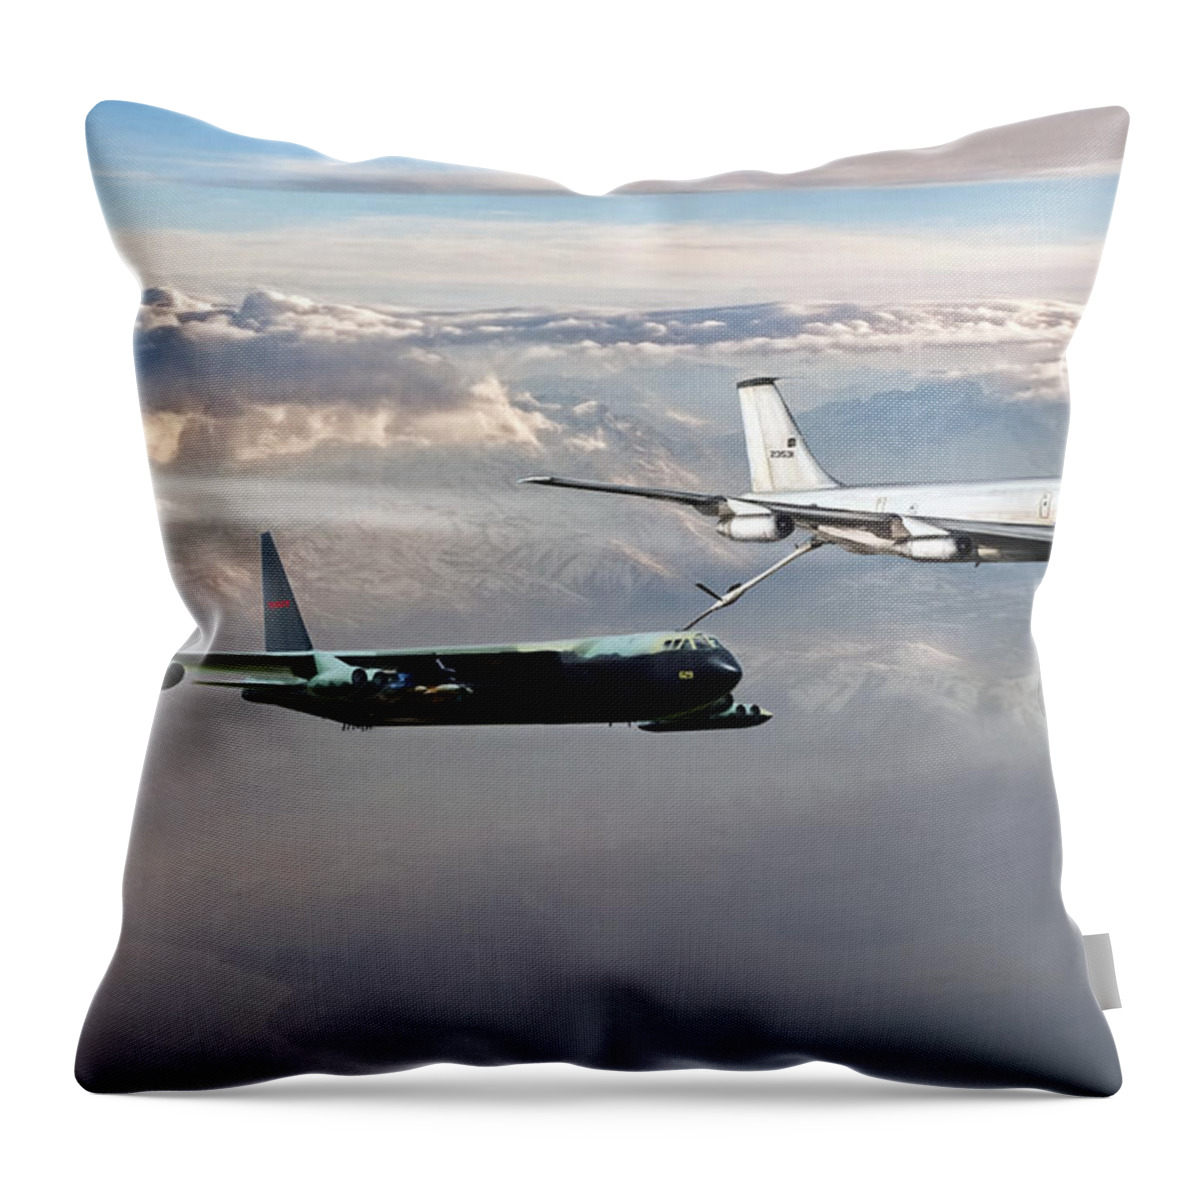 Aviation Throw Pillow featuring the digital art Full Service by Peter Chilelli